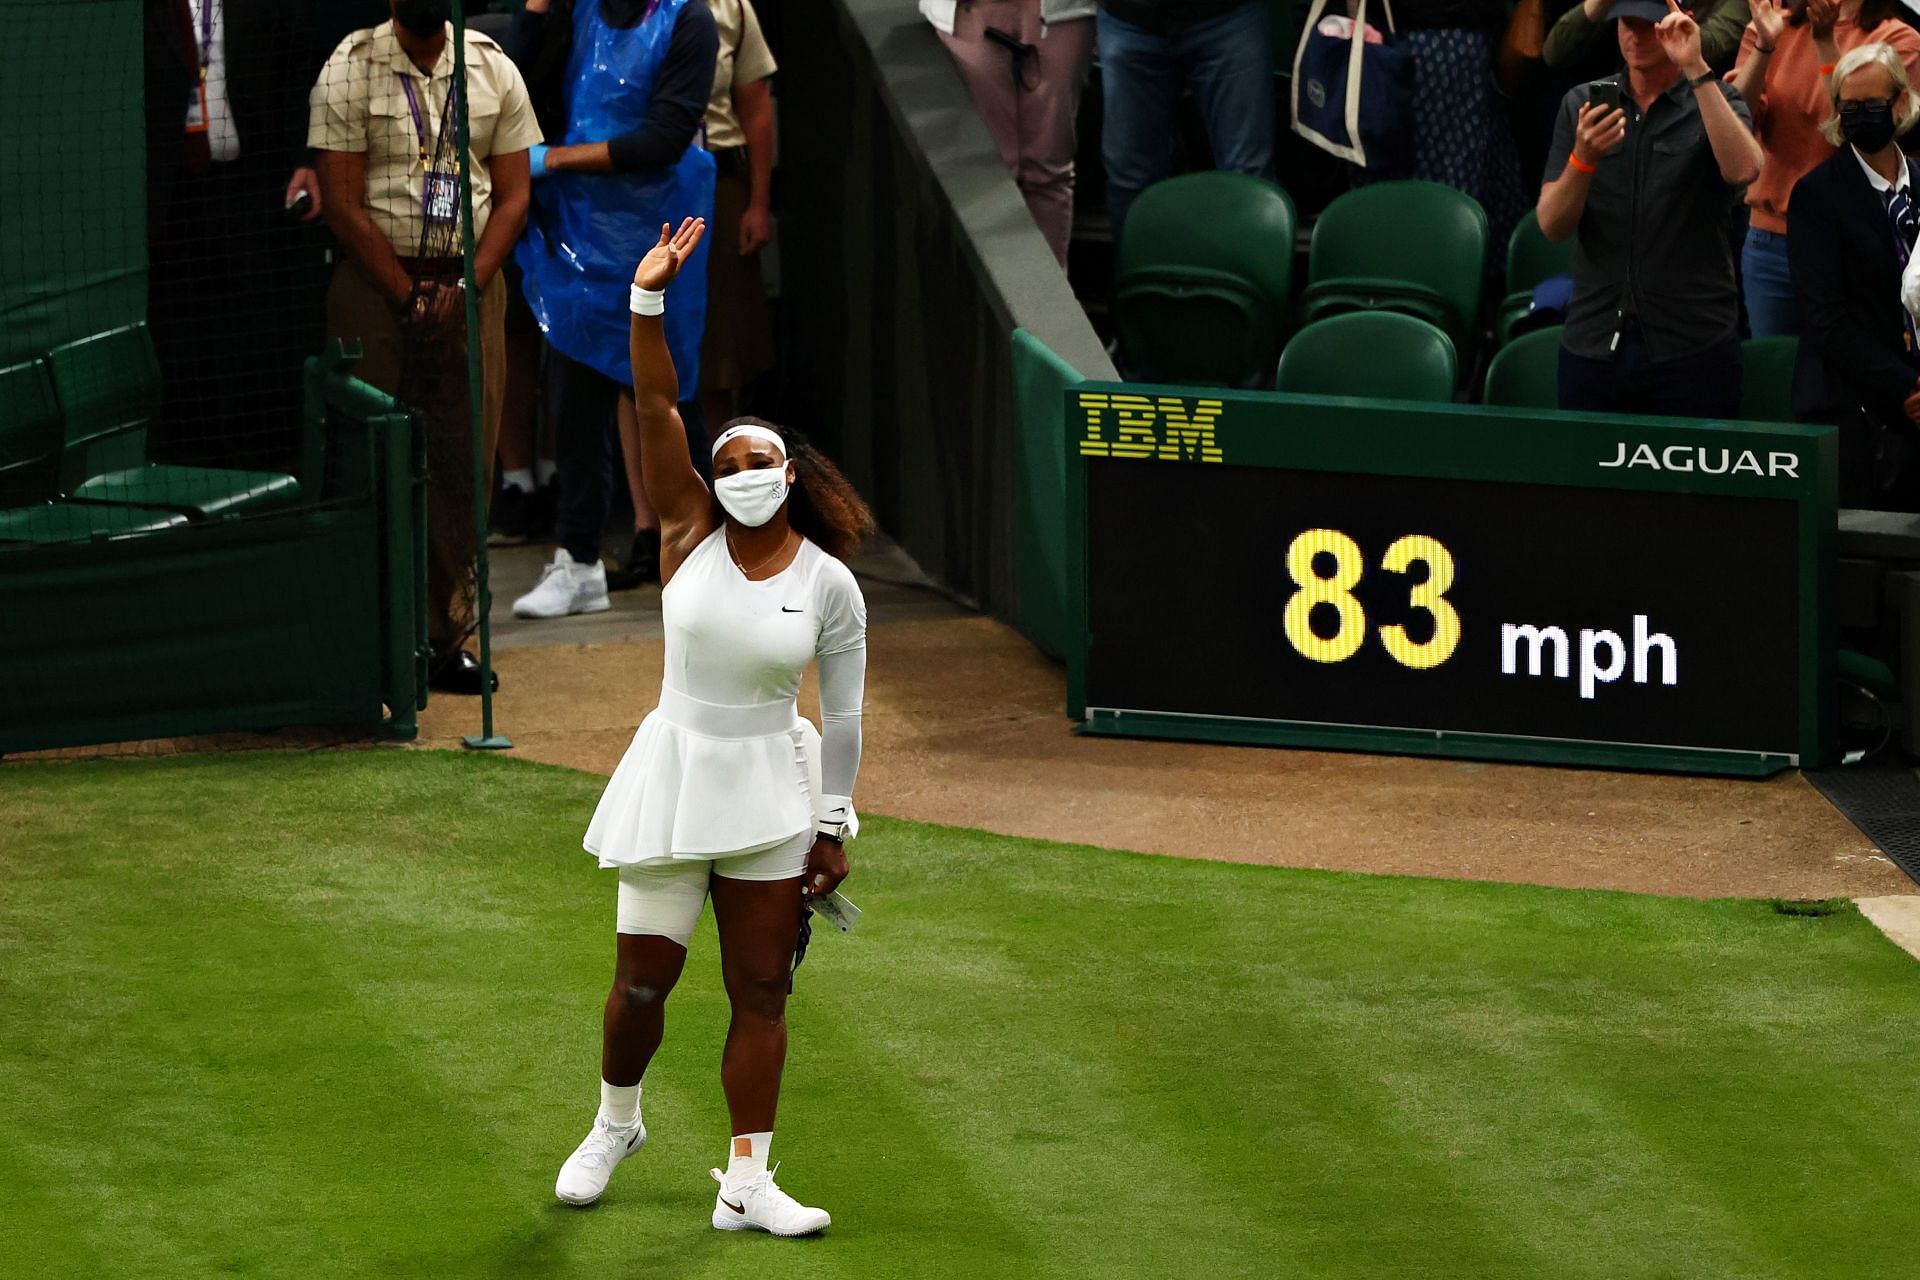 Serena Williams withdrew mid-match in the fourth round of Wimbledon 2021 due to injury